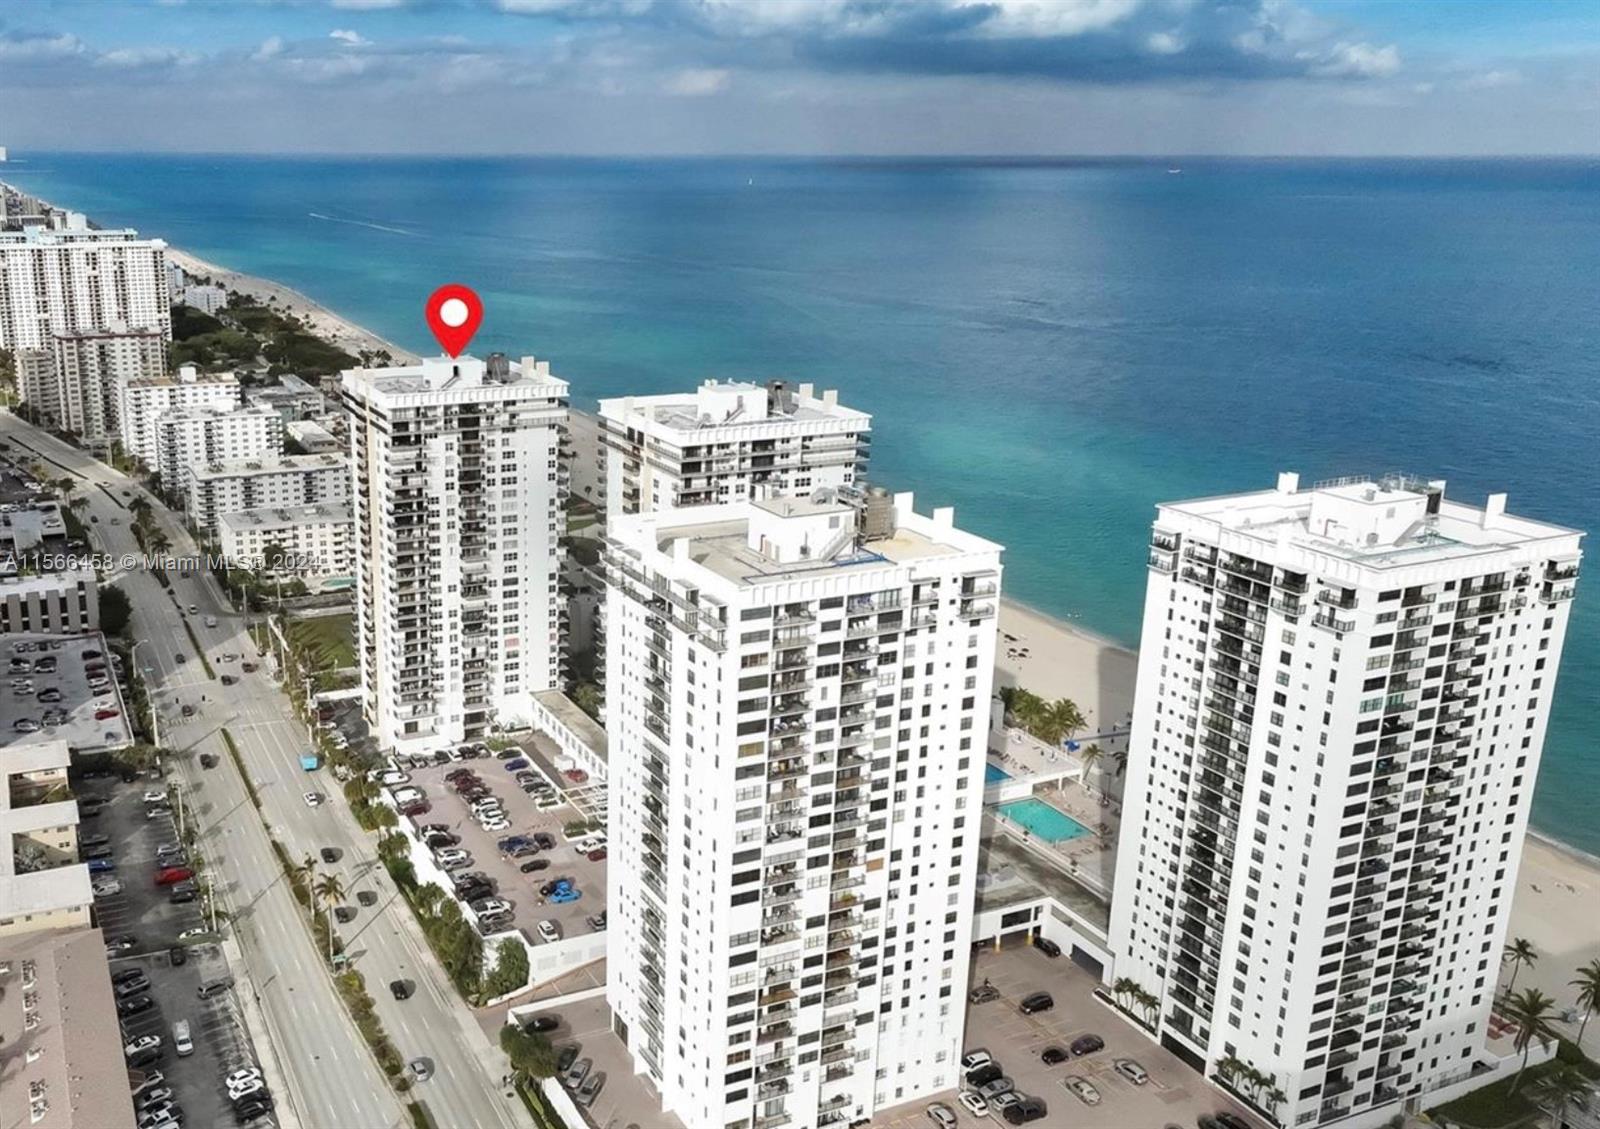 Photo of 2301 S Ocean Dr #2207 in Hollywood, FL